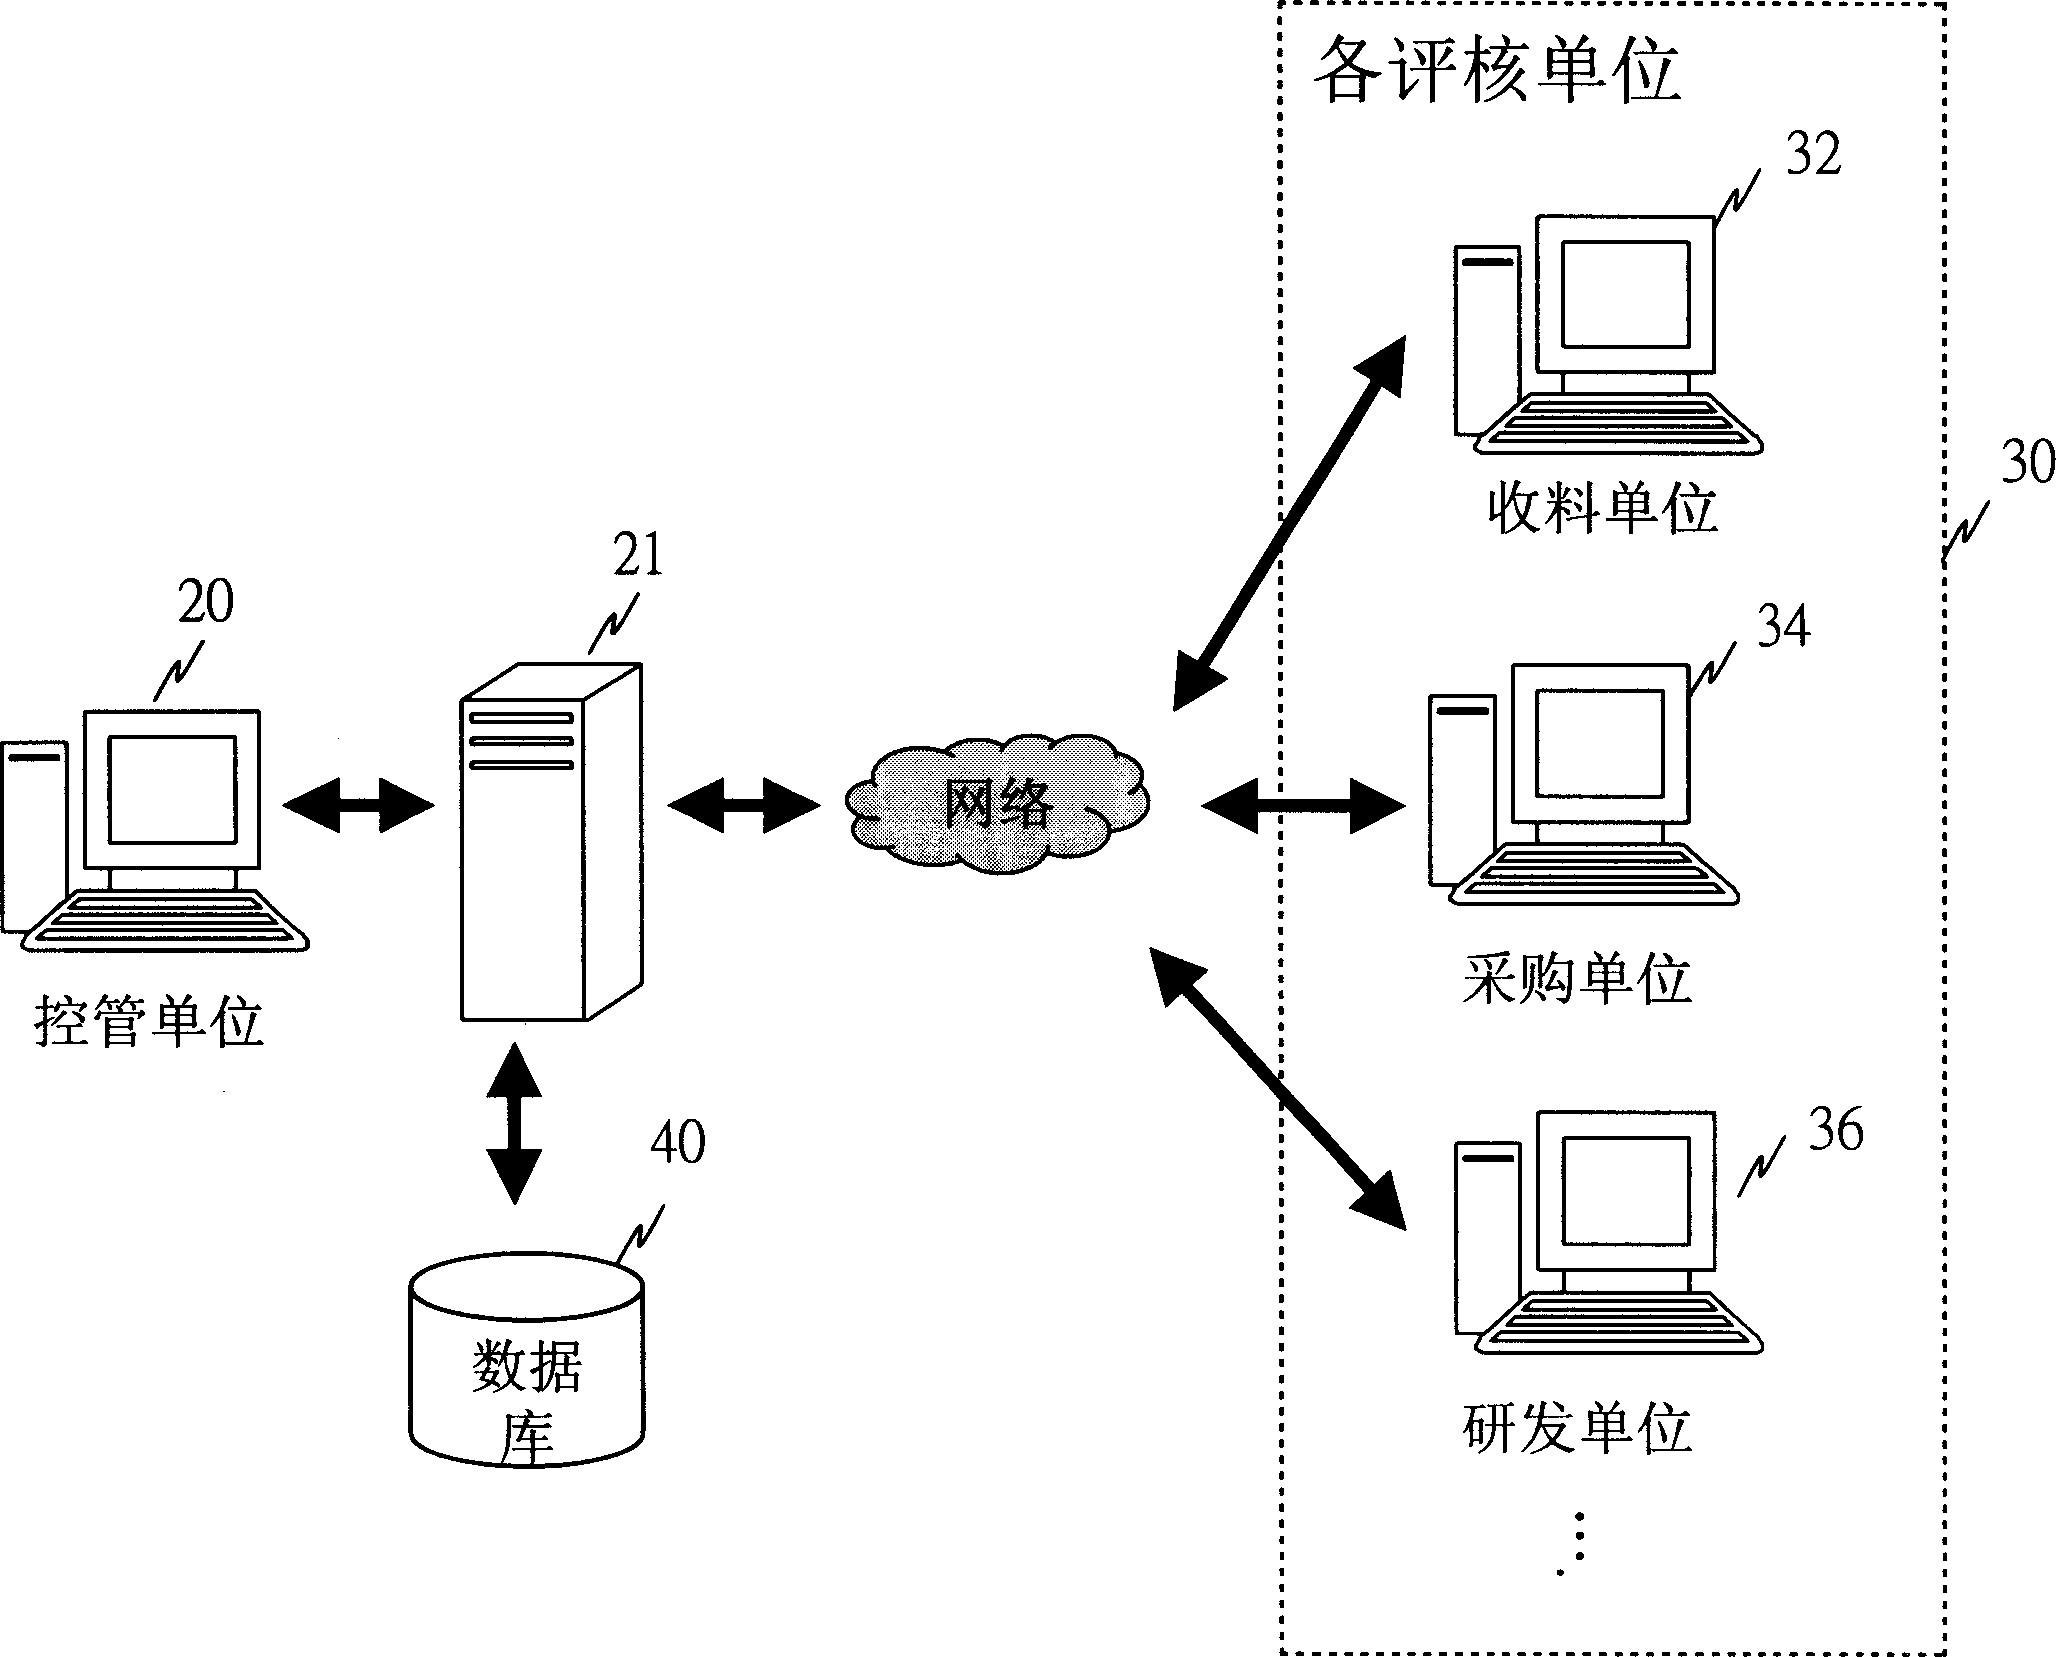 Method for evaluating material supplier